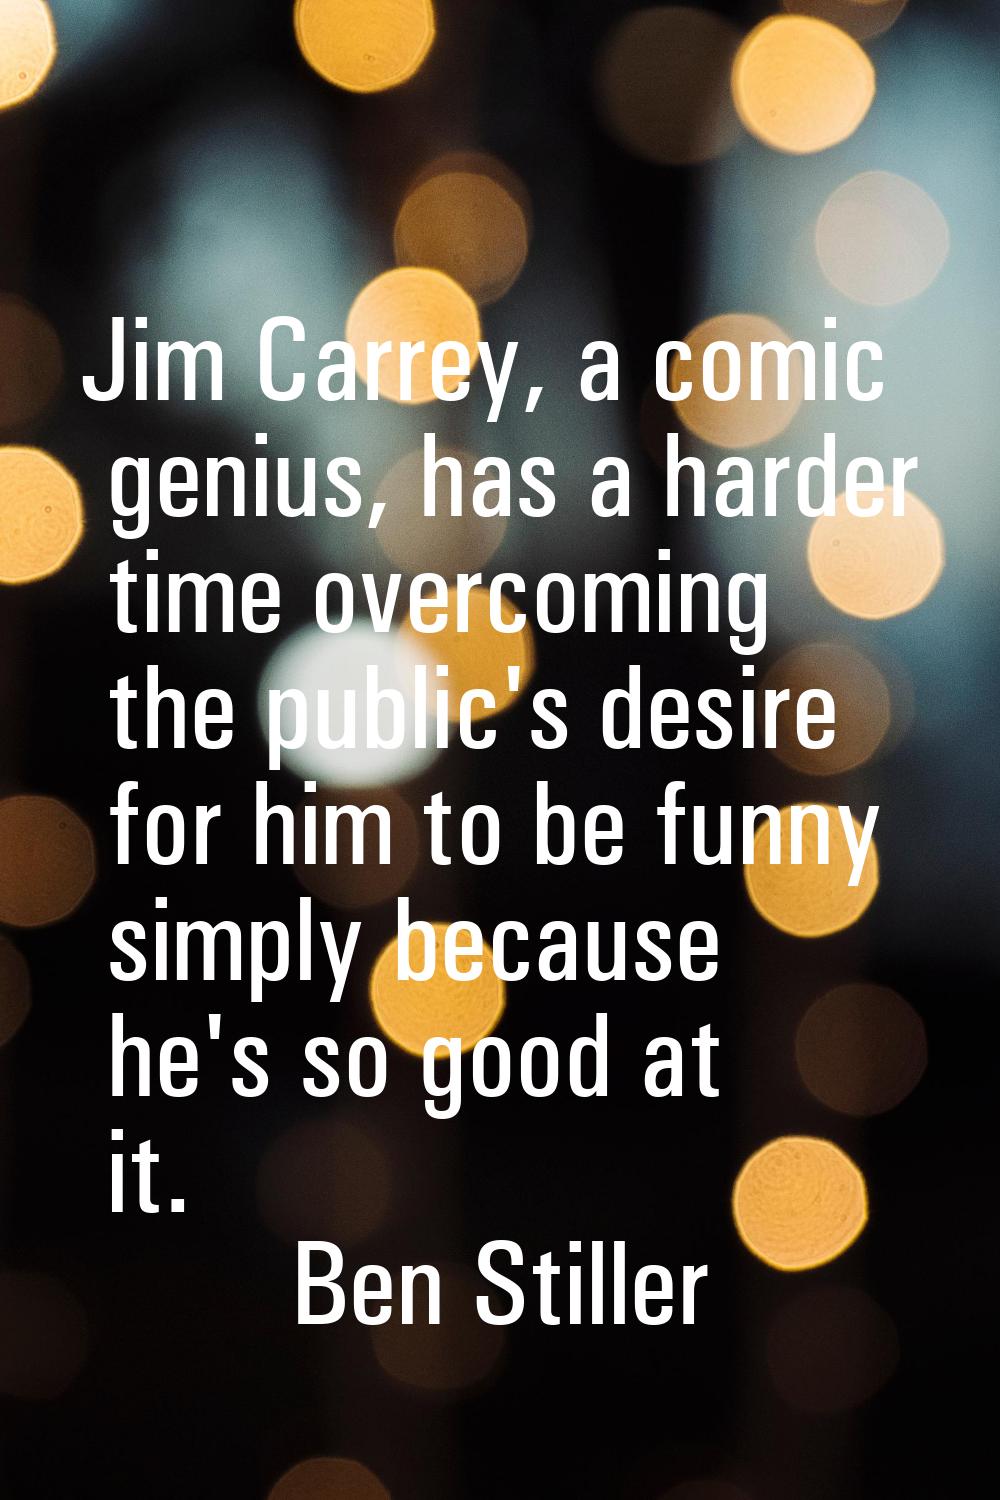 Jim Carrey, a comic genius, has a harder time overcoming the public's desire for him to be funny si